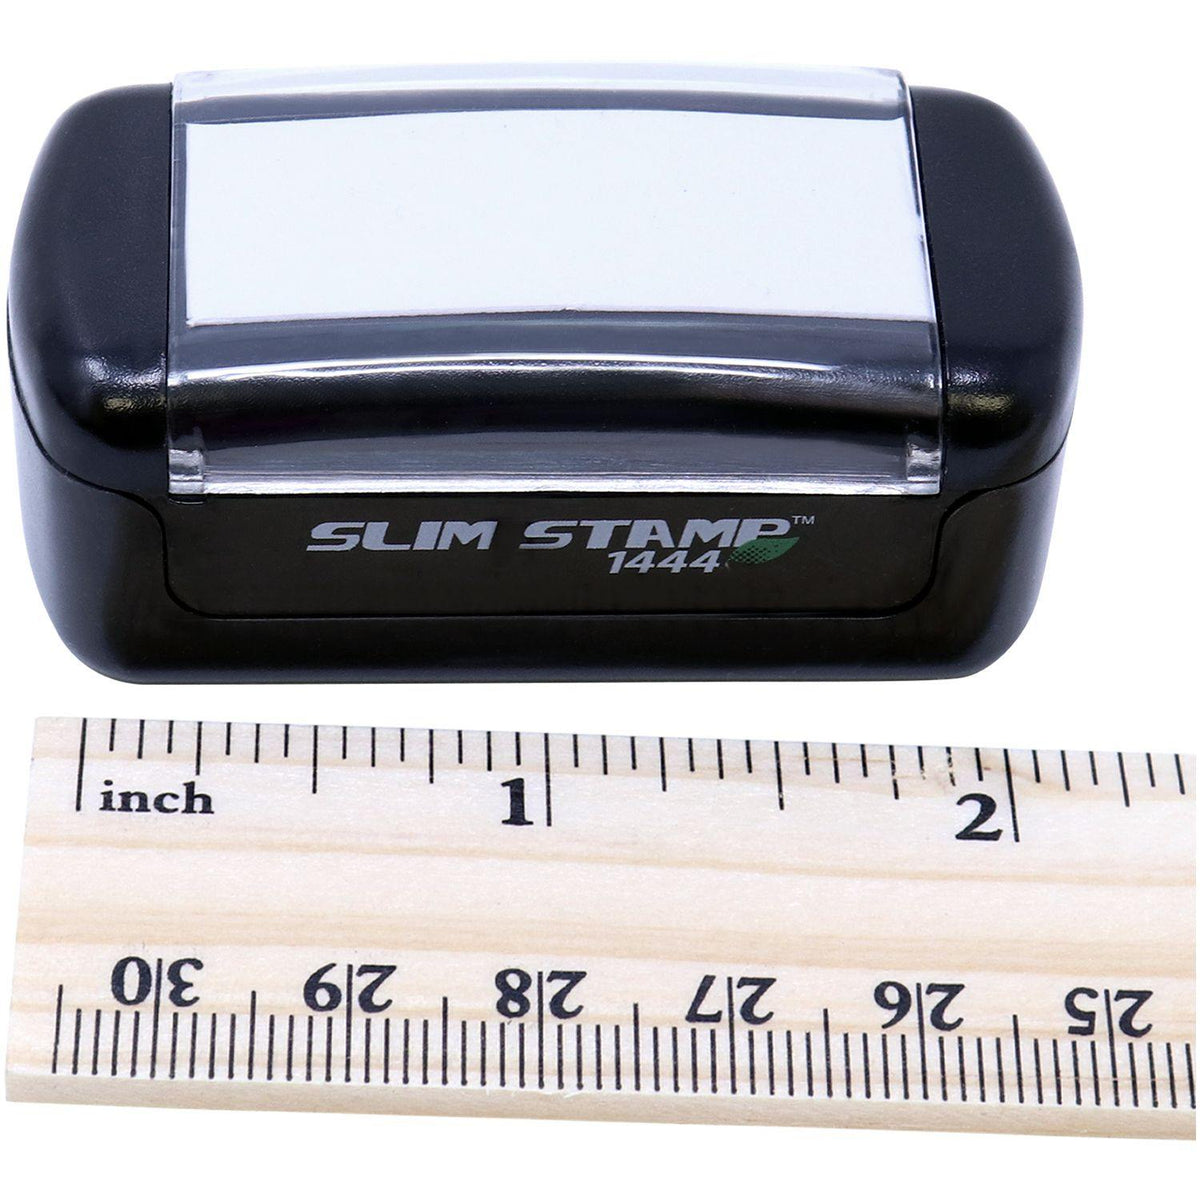 Measurement Slim Pre-Inked Please Forward Insurance Form Stamp with Ruler